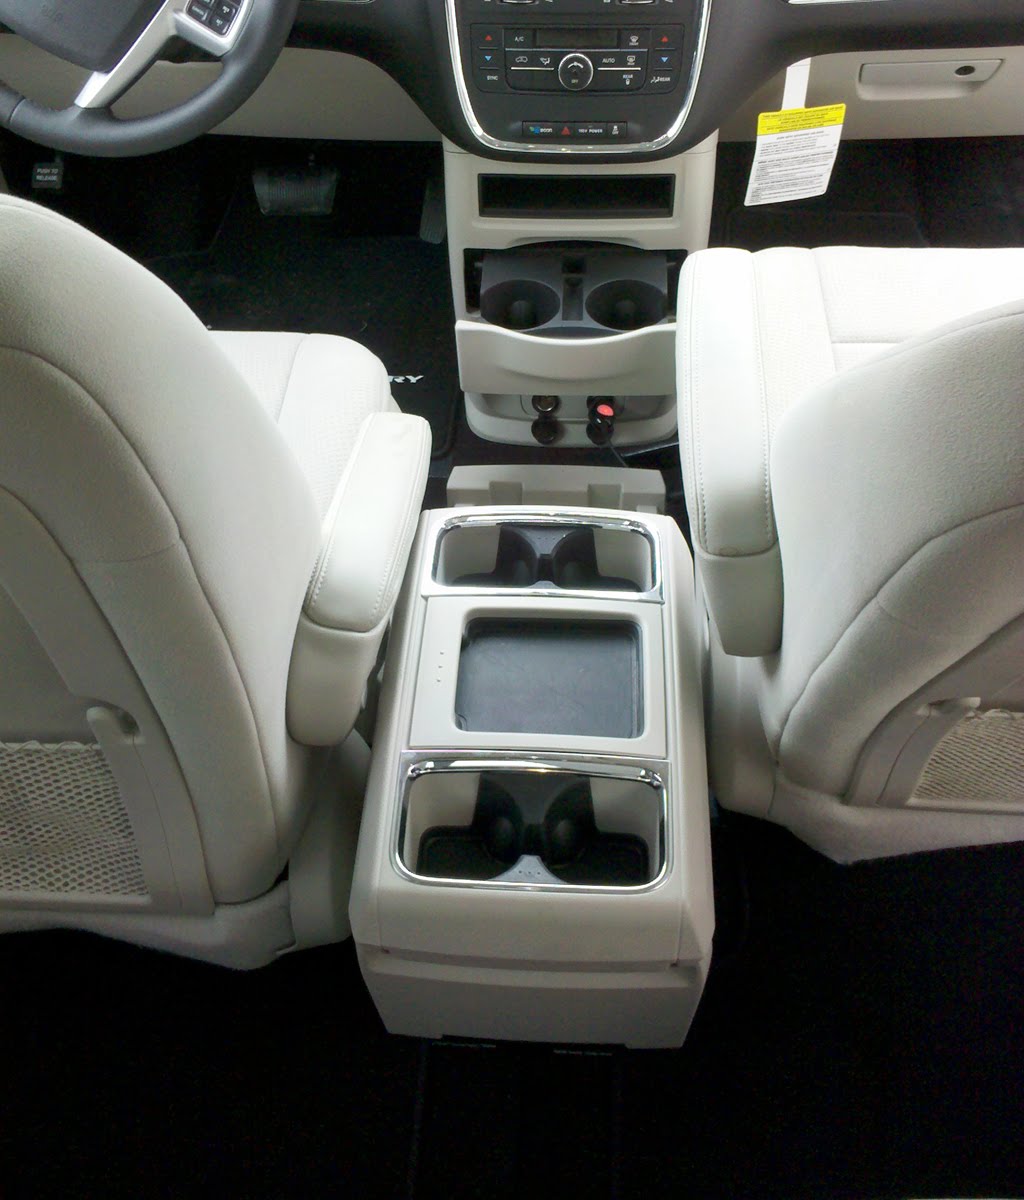 Console for 2006 chrysler town and country